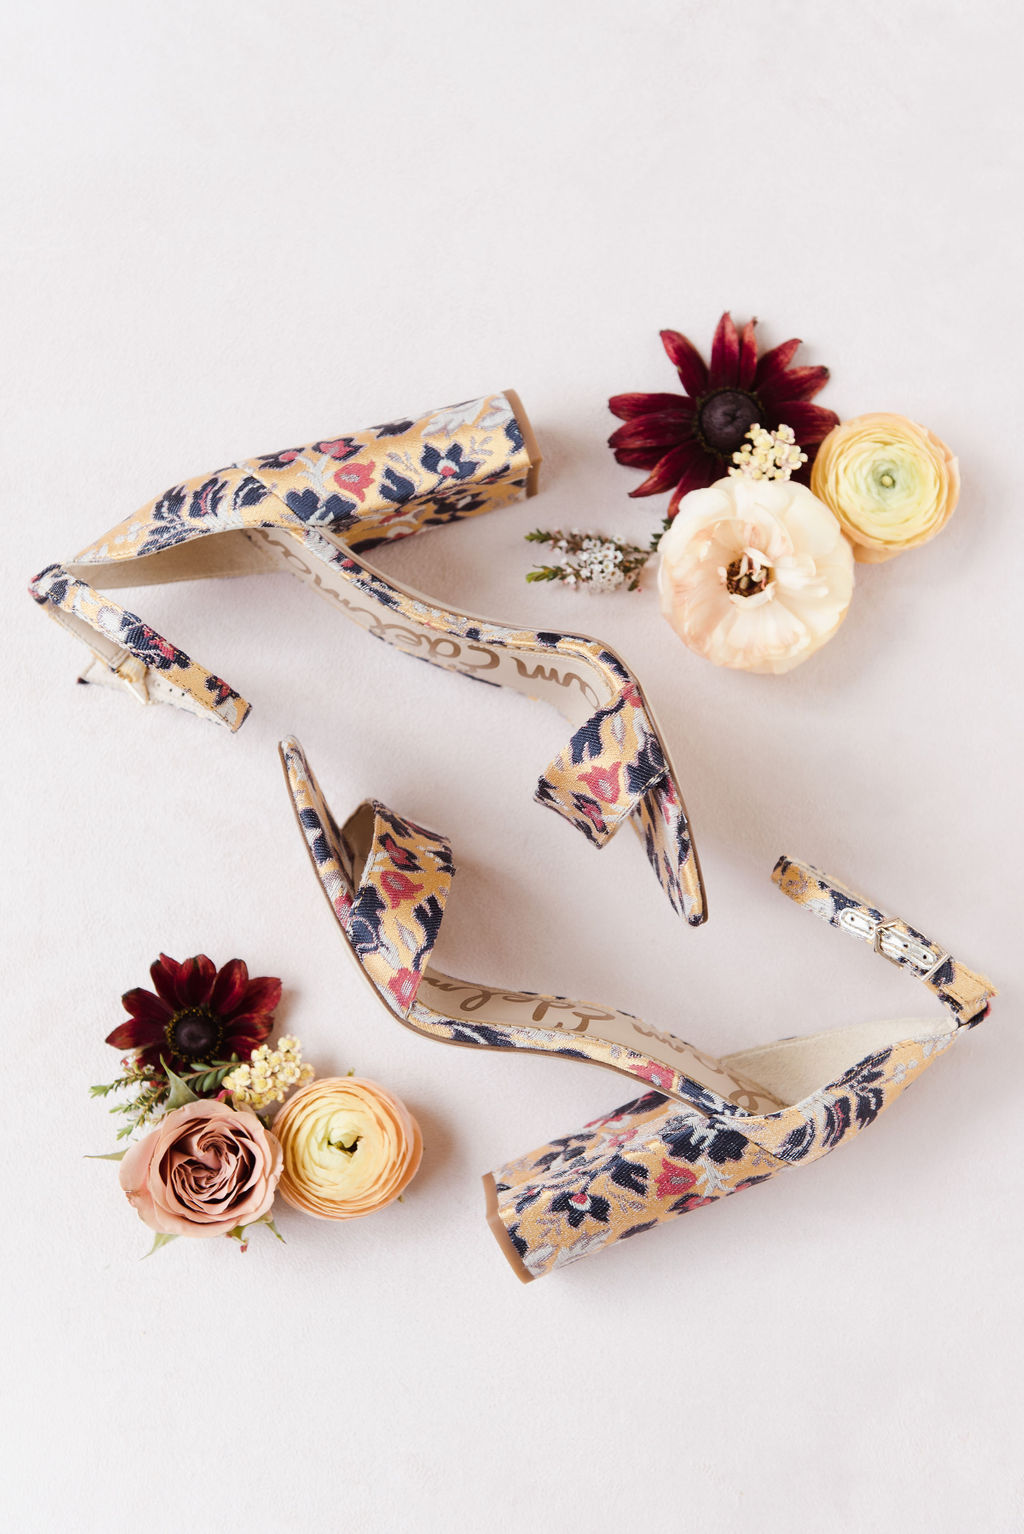 Wildflower and gold inspired high heels styled with tangerine and blush florals